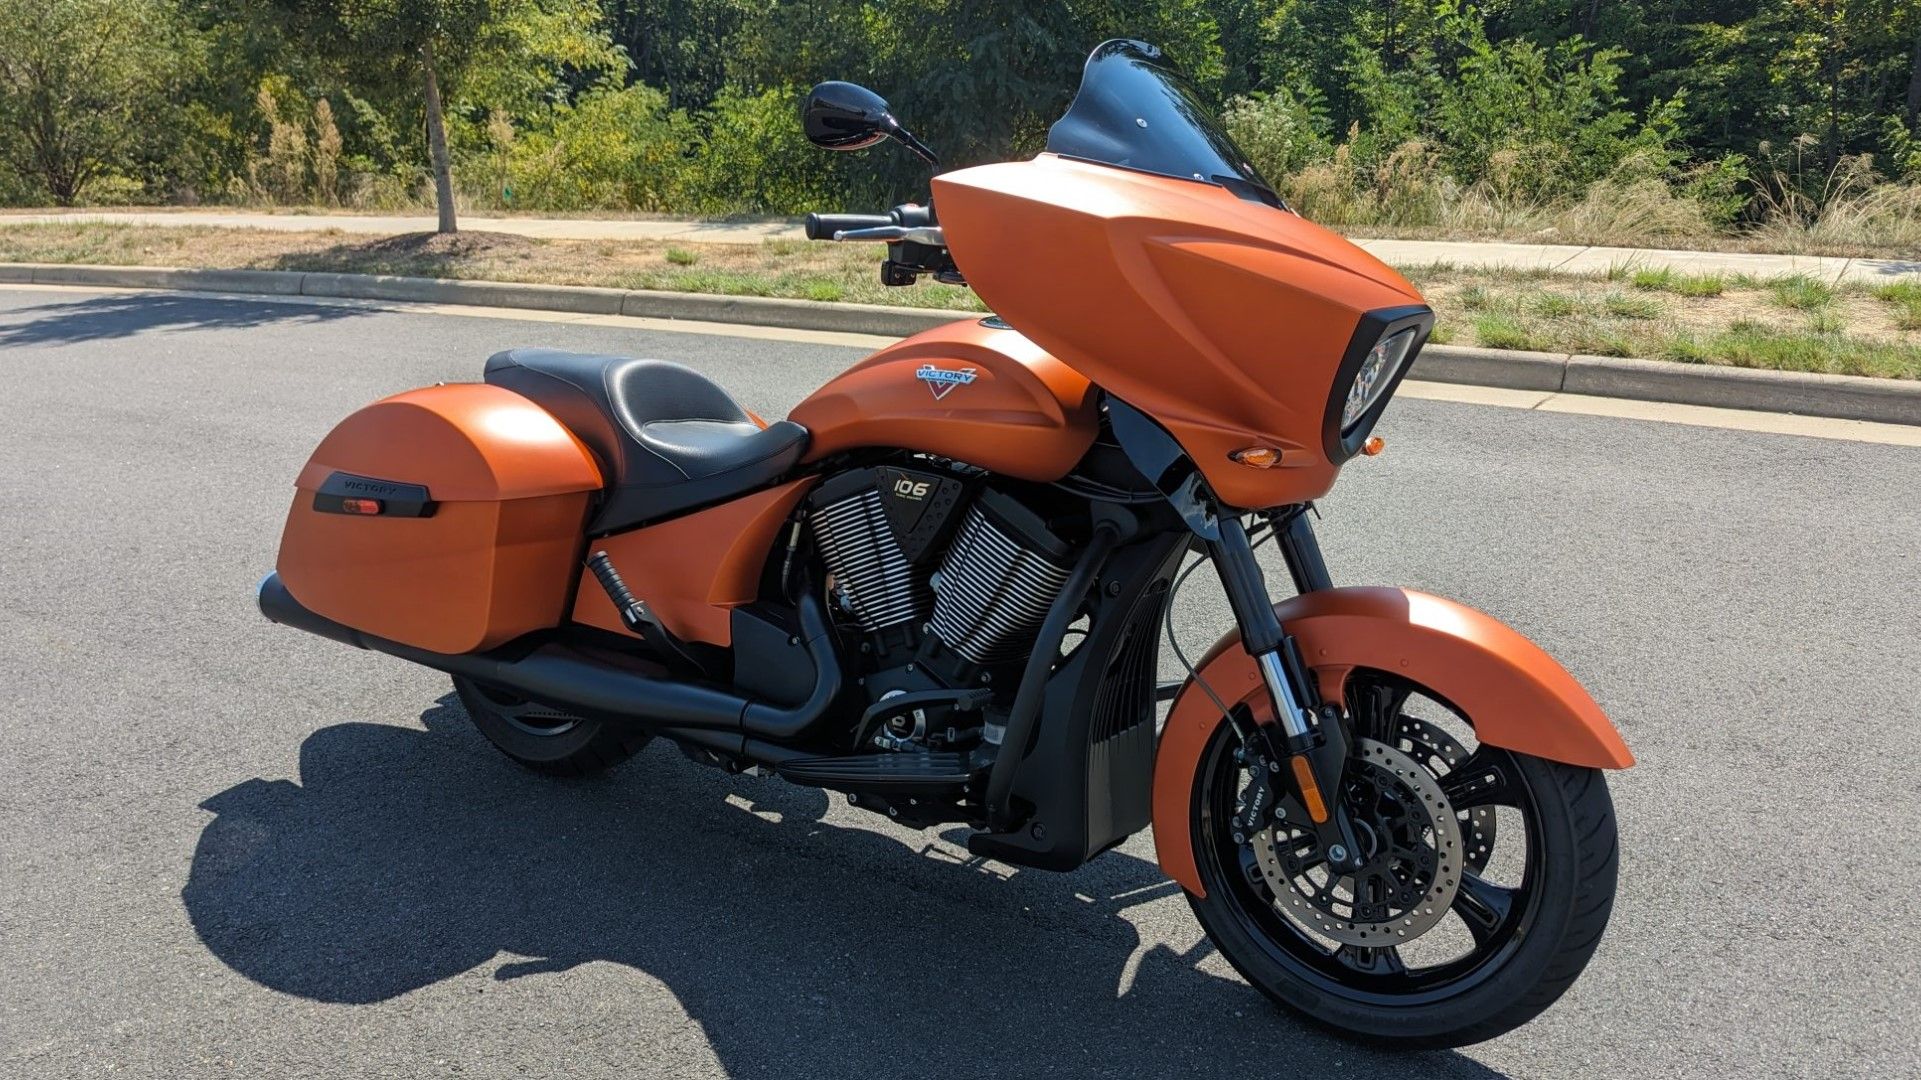 2017 Victory Cross Country in rtoange front third quarter view